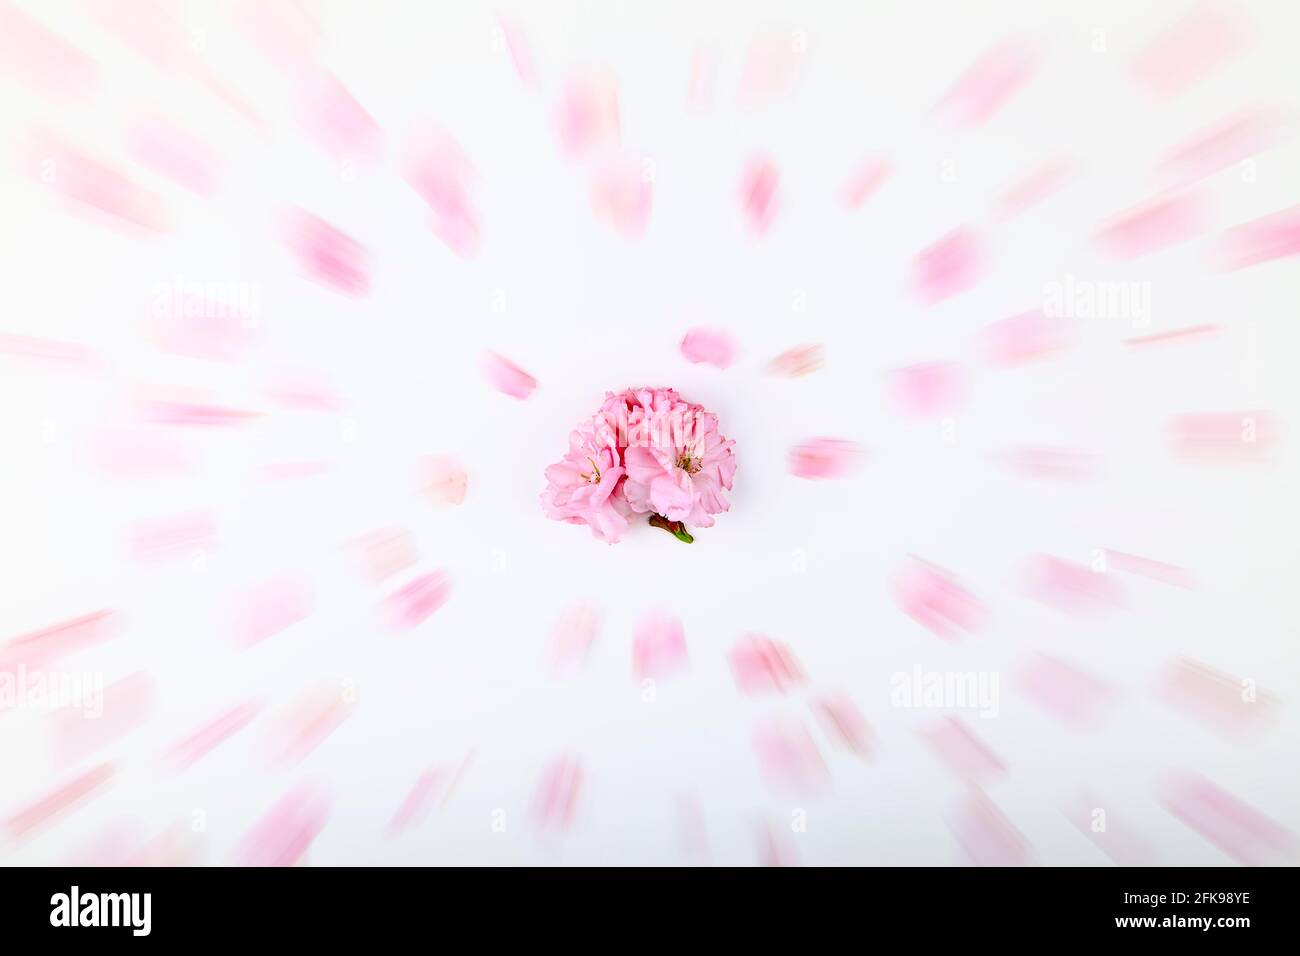 Ornamental pink cherry tree blossom on a white background with a zoom burst filter applied Stock Photo